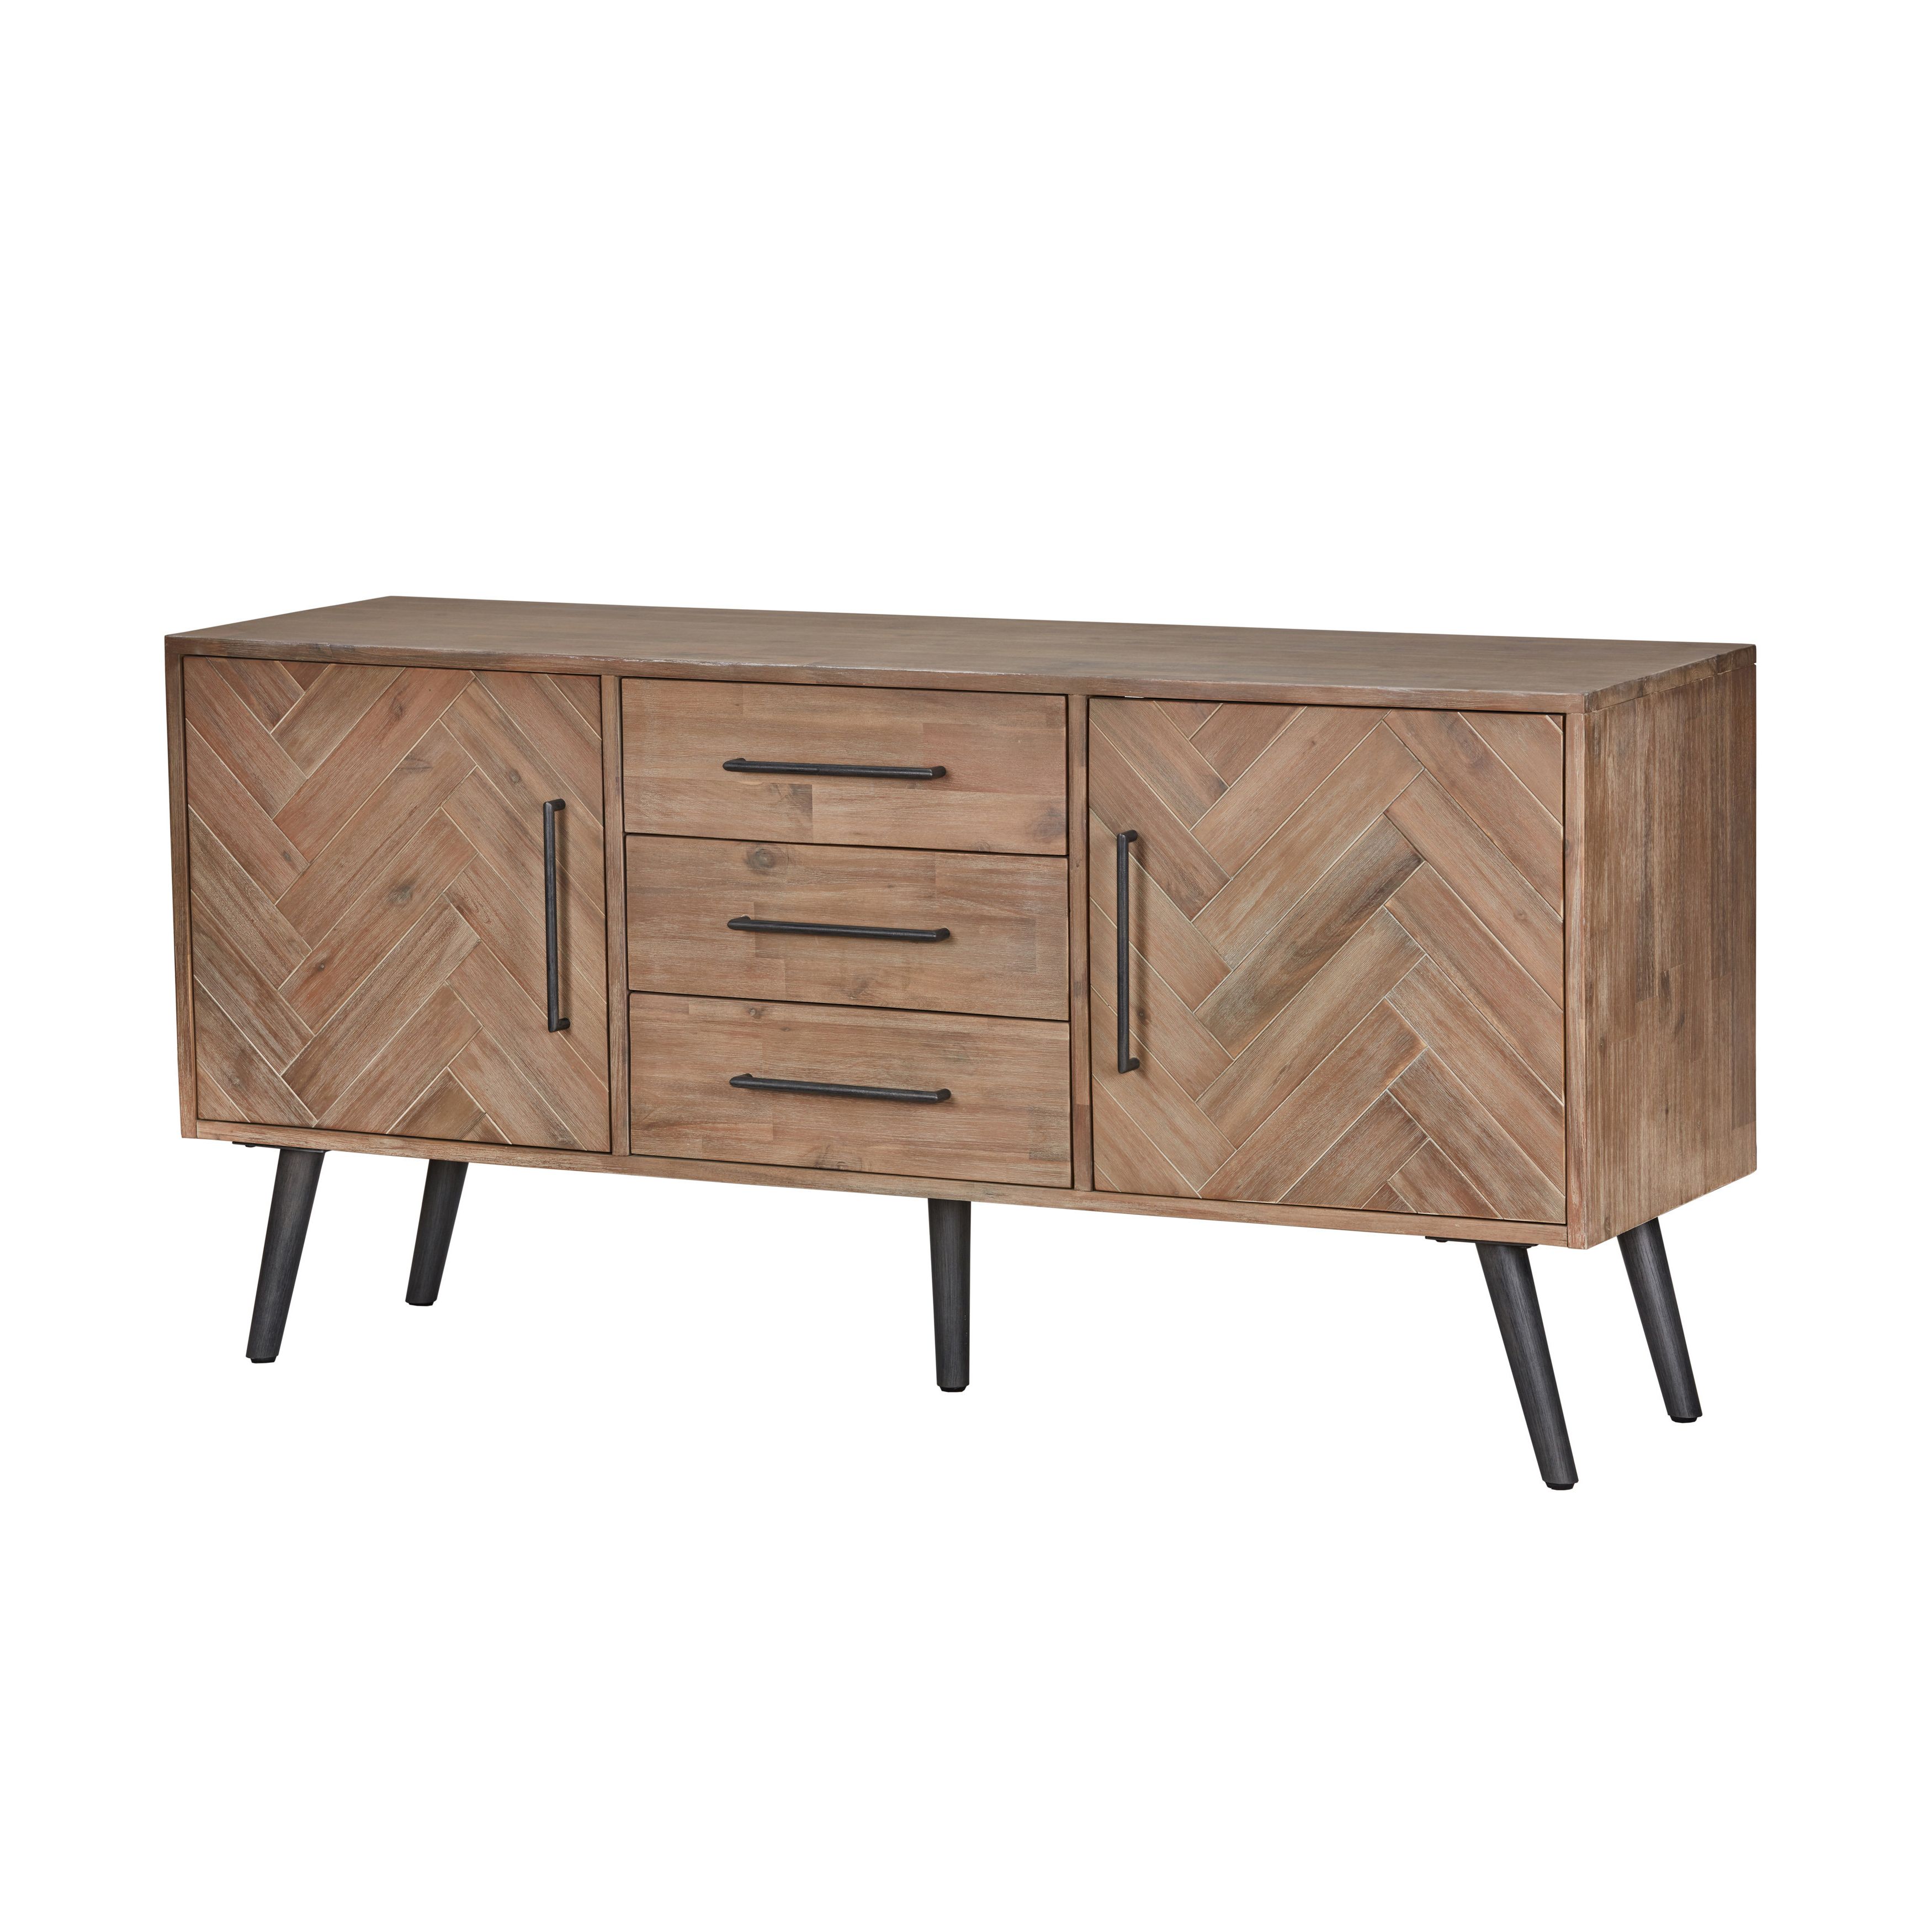 Extra Long Credenza You'll Love In 2019 | Wayfair Throughout Pink And Navy Peaks Credenzas (Gallery 17 of 20)